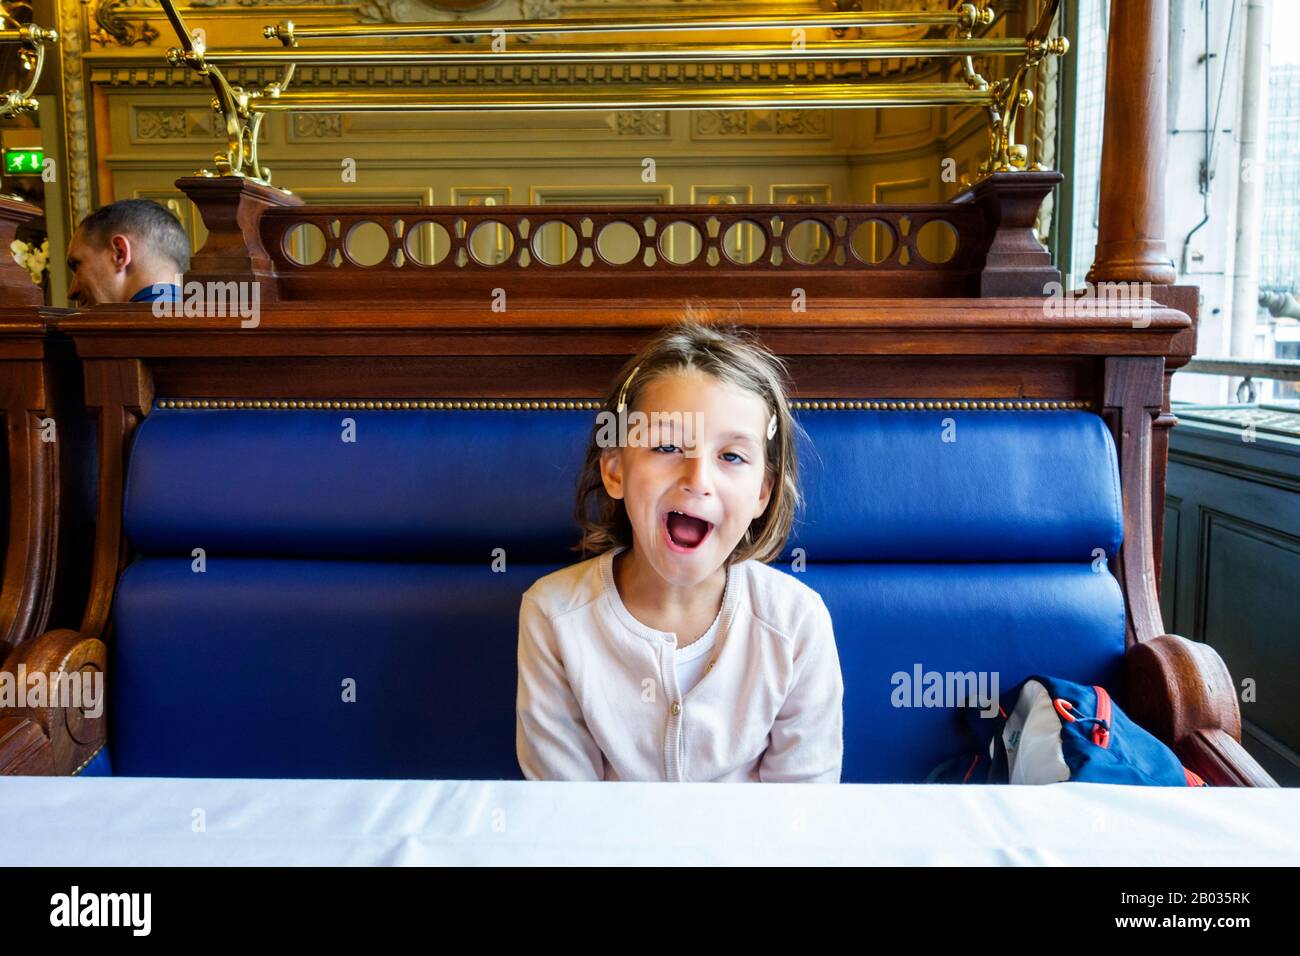 Young girl yawning in le Train Bleu, french restaurant located in the Gare de Lyon railway station in Paris. The restaurant was created in 1900. Stock Photo